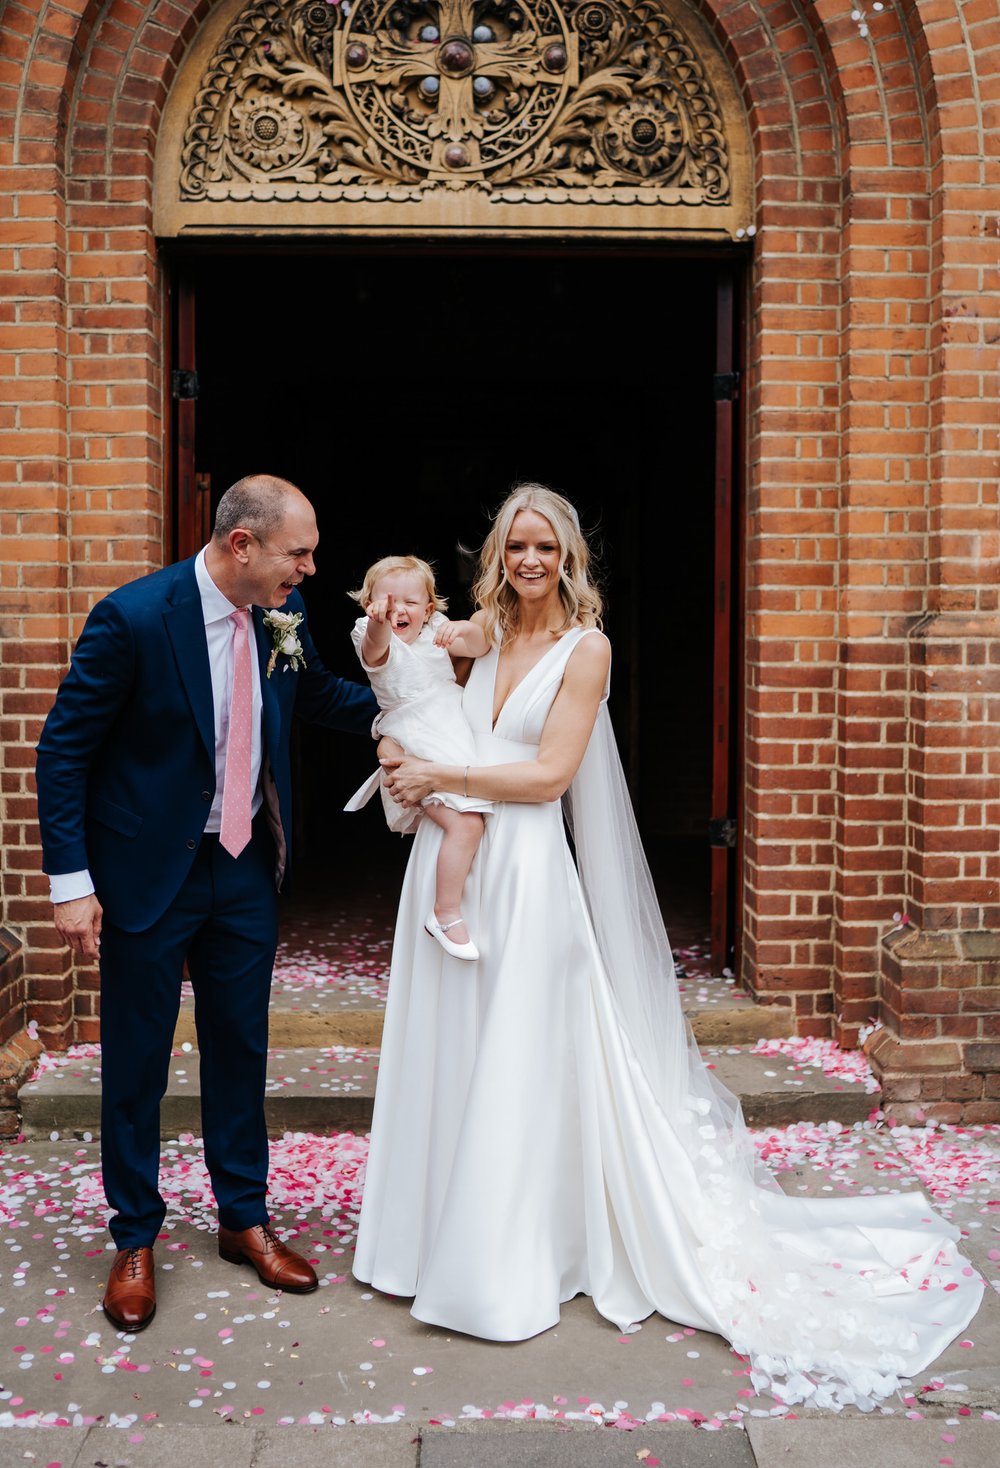 Bride and groom hold their daughter for wedding photo while the daughter squeals in excitement